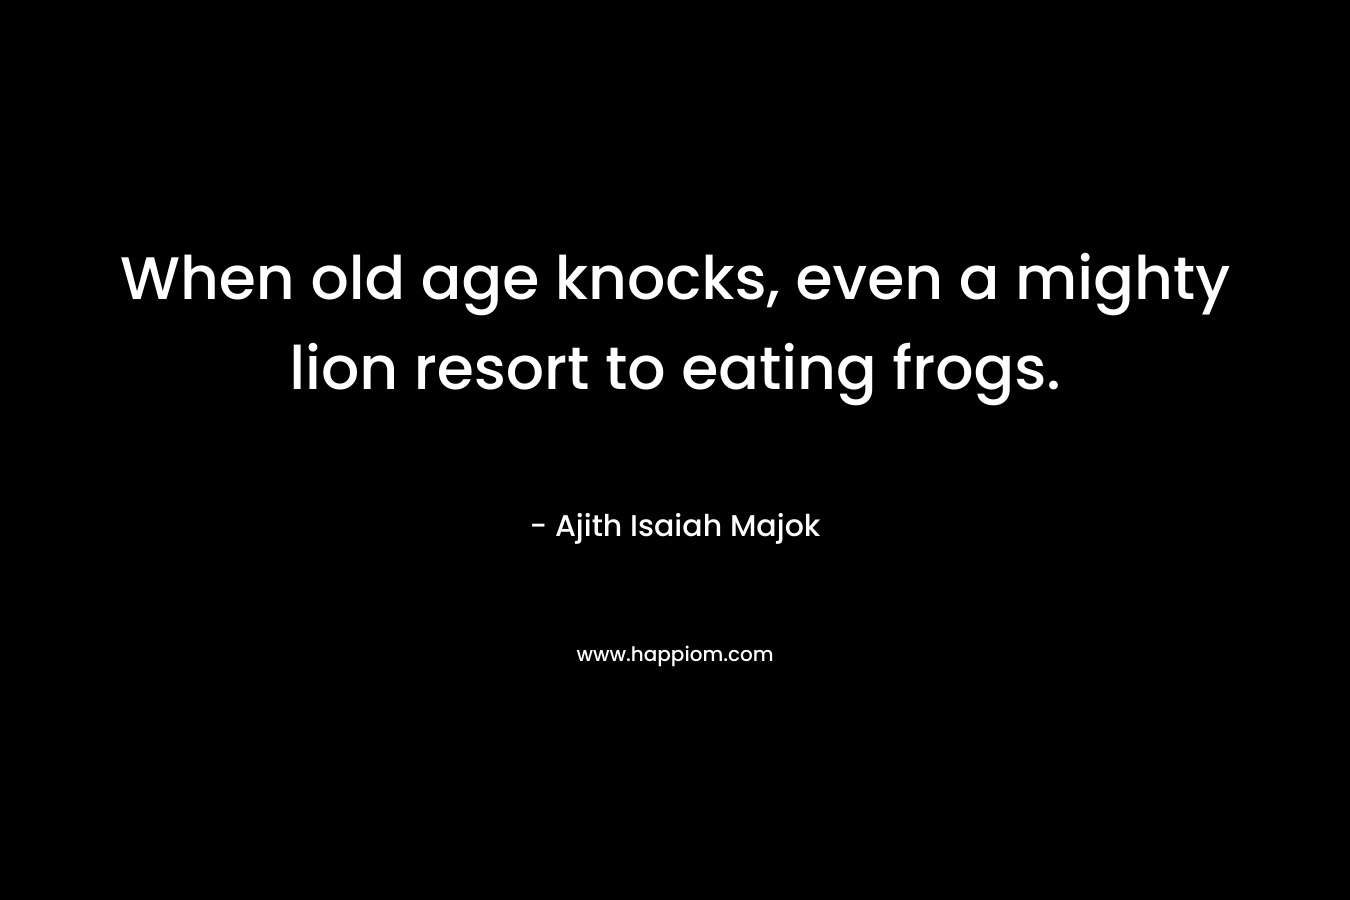 When old age knocks, even a mighty lion resort to eating frogs. – Ajith Isaiah Majok